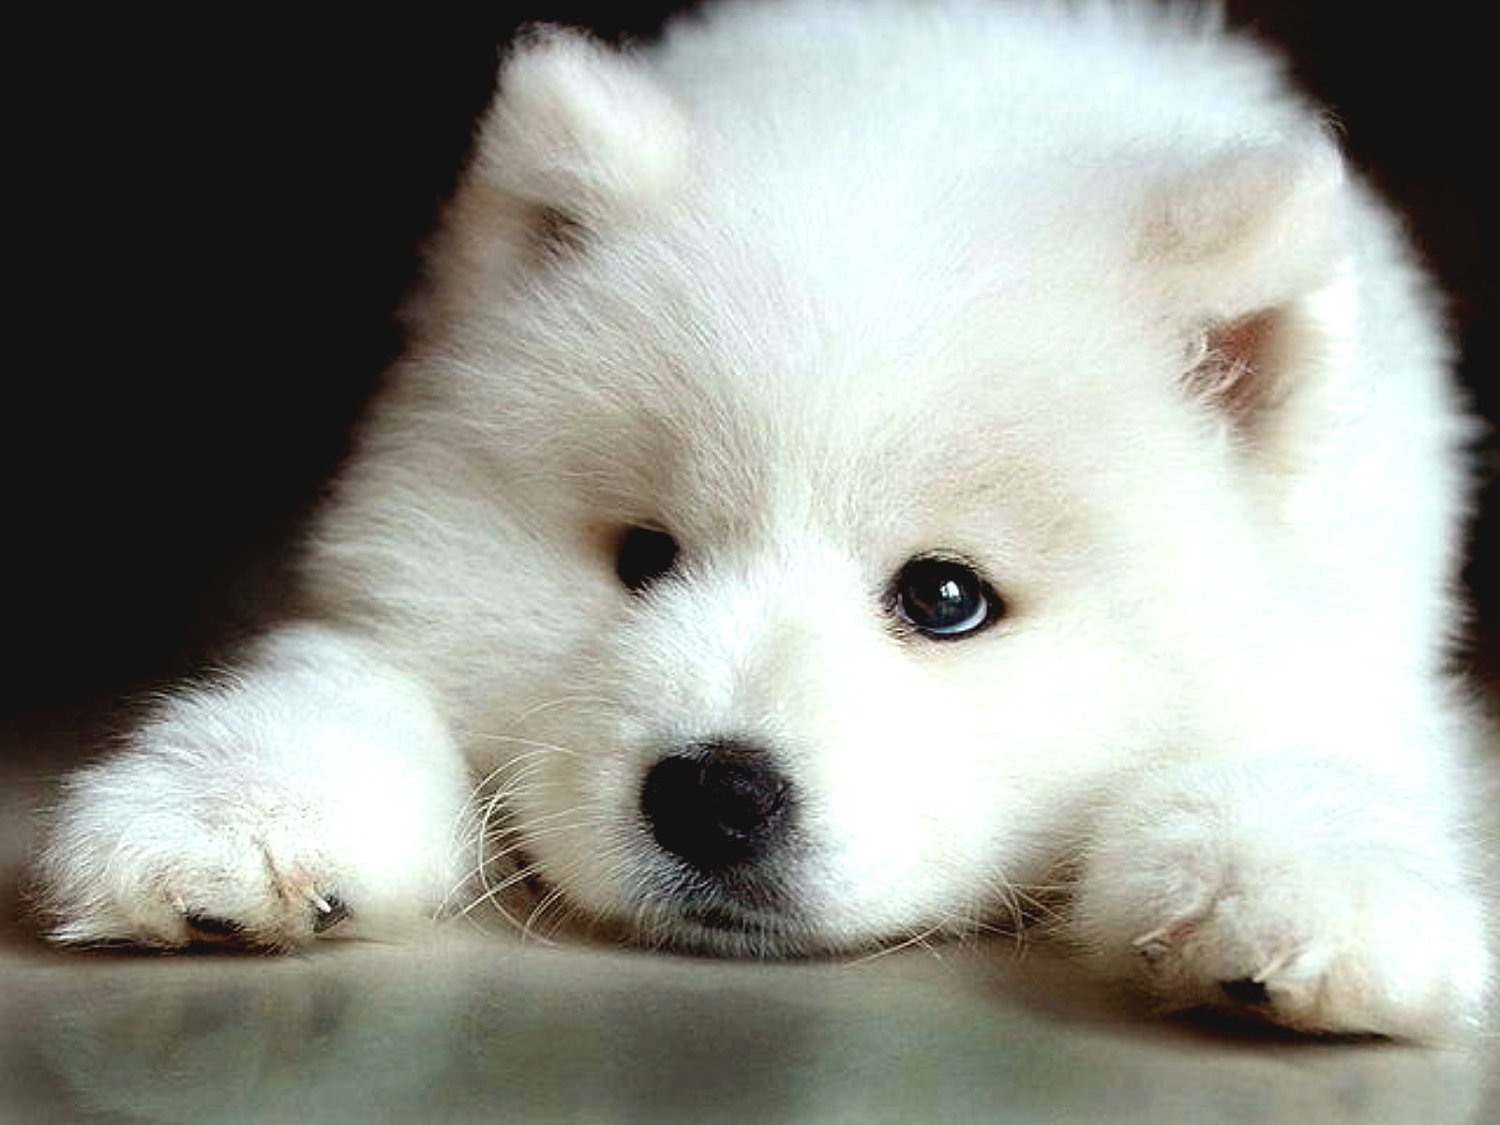 Indisputable Proof That Samoyed Dogs Are Amazing